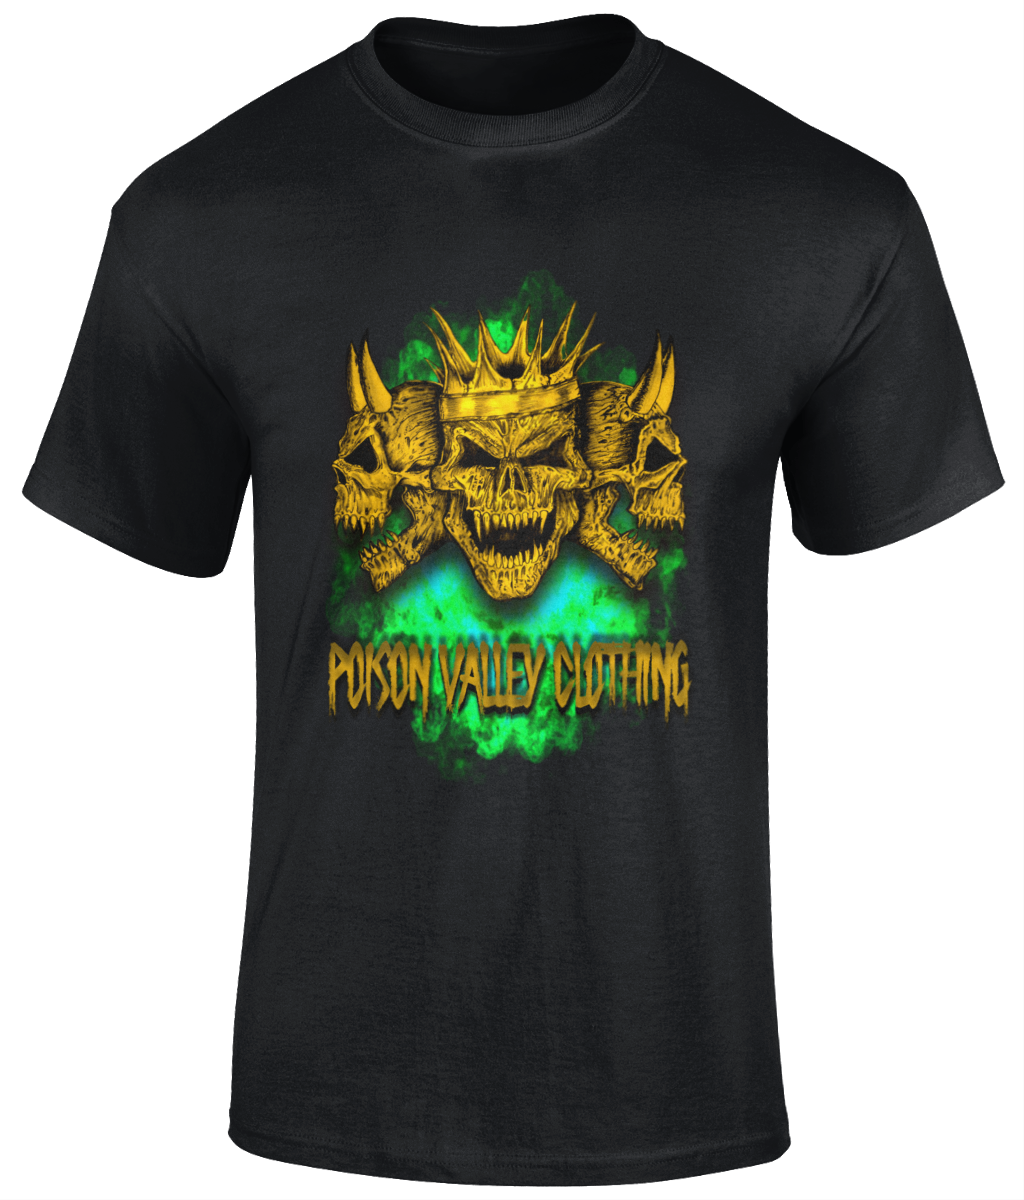 POISON VALLEY CLOTHING presents  "KING OF THE DEAD" original artwork by David Pankhurst  Material: 100% cotton.*  Seamless twin needle collar. Taped neck and shoulders. Tubular body. Twin needle sleeves and hem Available in Black, White. Sizes small to 5XL